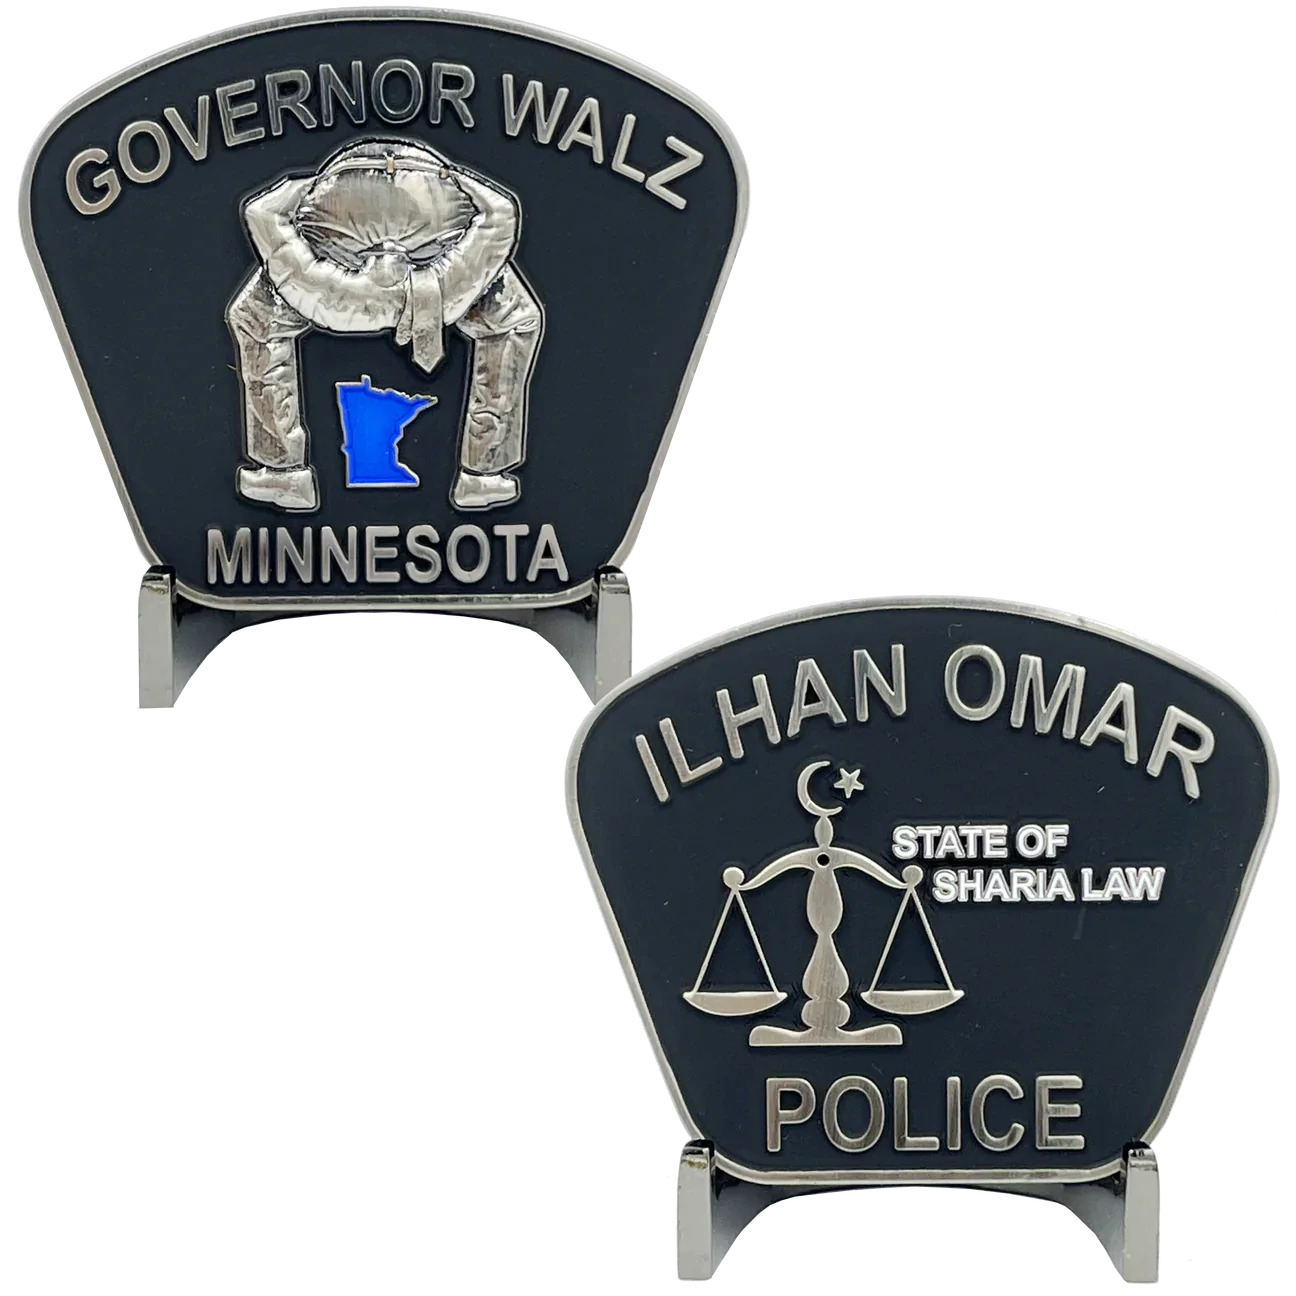 The Official Unofficial Governor Walz Minneapolis Police Department Congresswoma